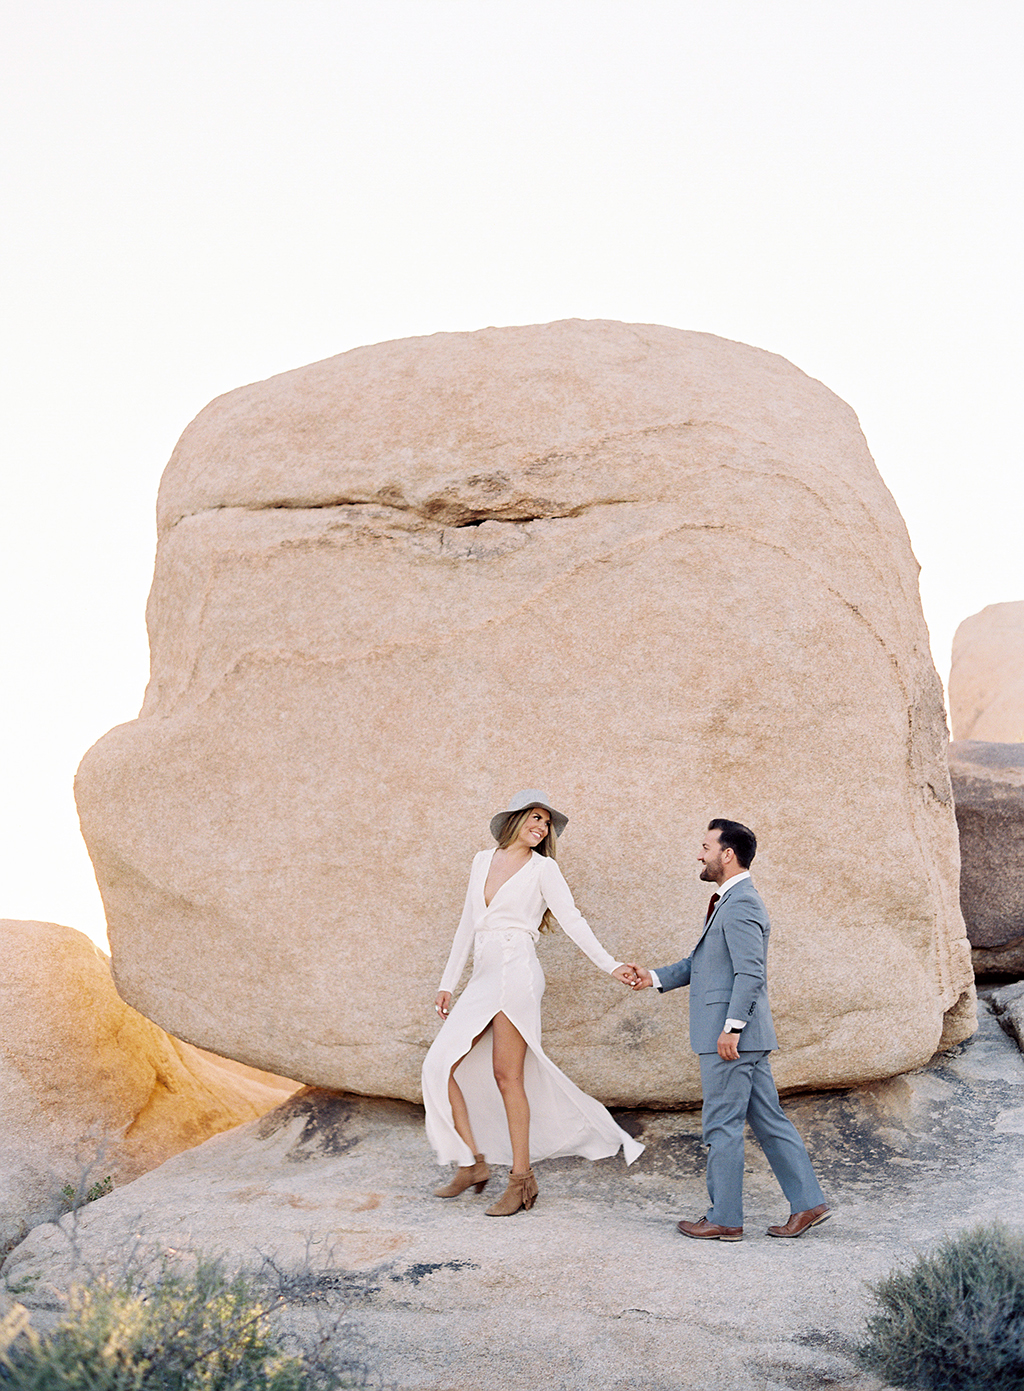 An engaged couple walking through Joshua Tree National Park for their engagement session.